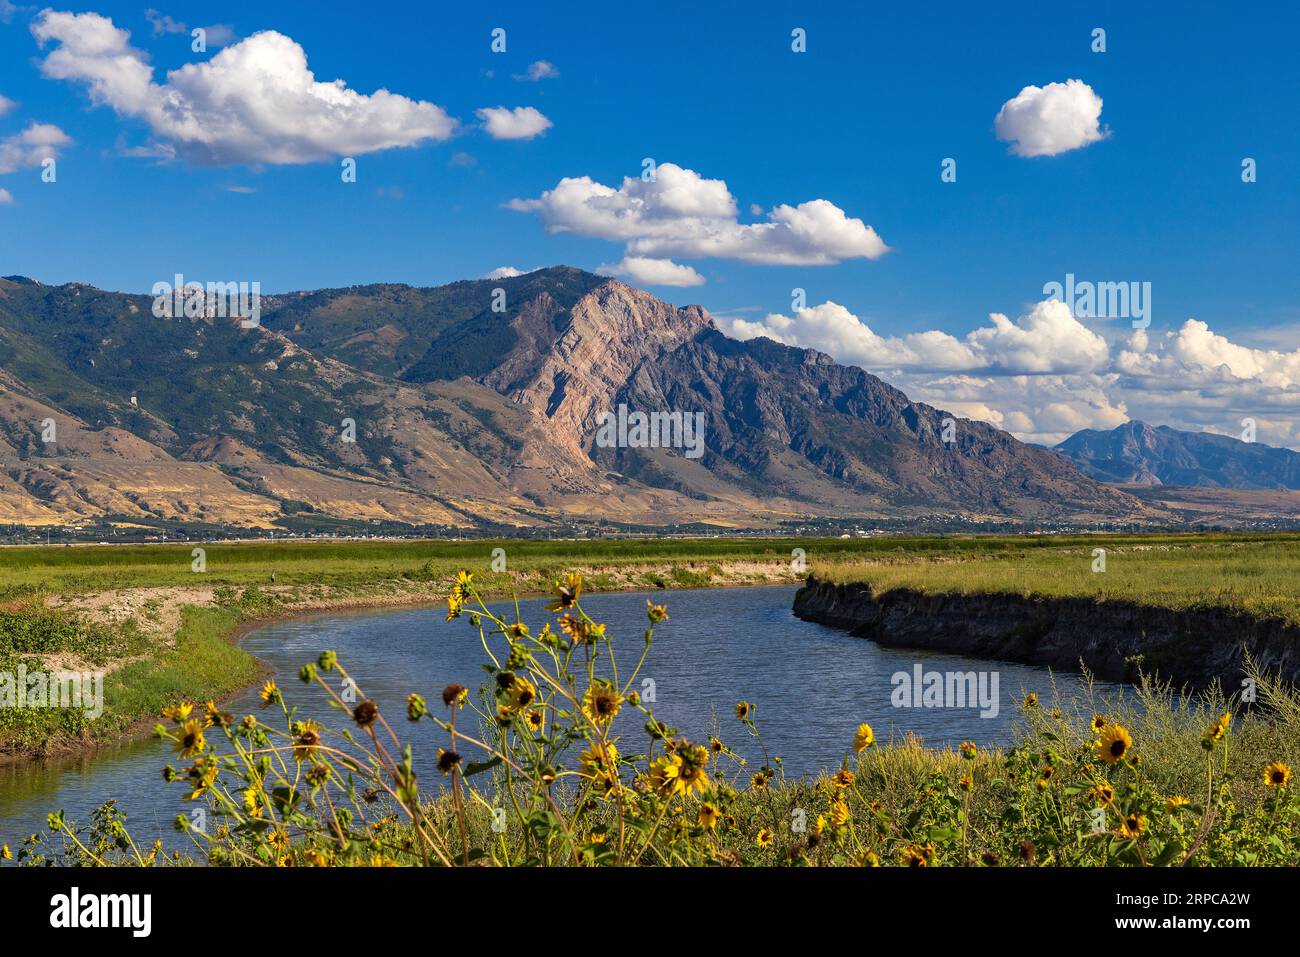 Willard Mountain with its iconic light-colored fault belt as seen from the Refuge Road of Bear River Migratory Bird Refuge, Box Elder County,Utah, USA. Stock Photo